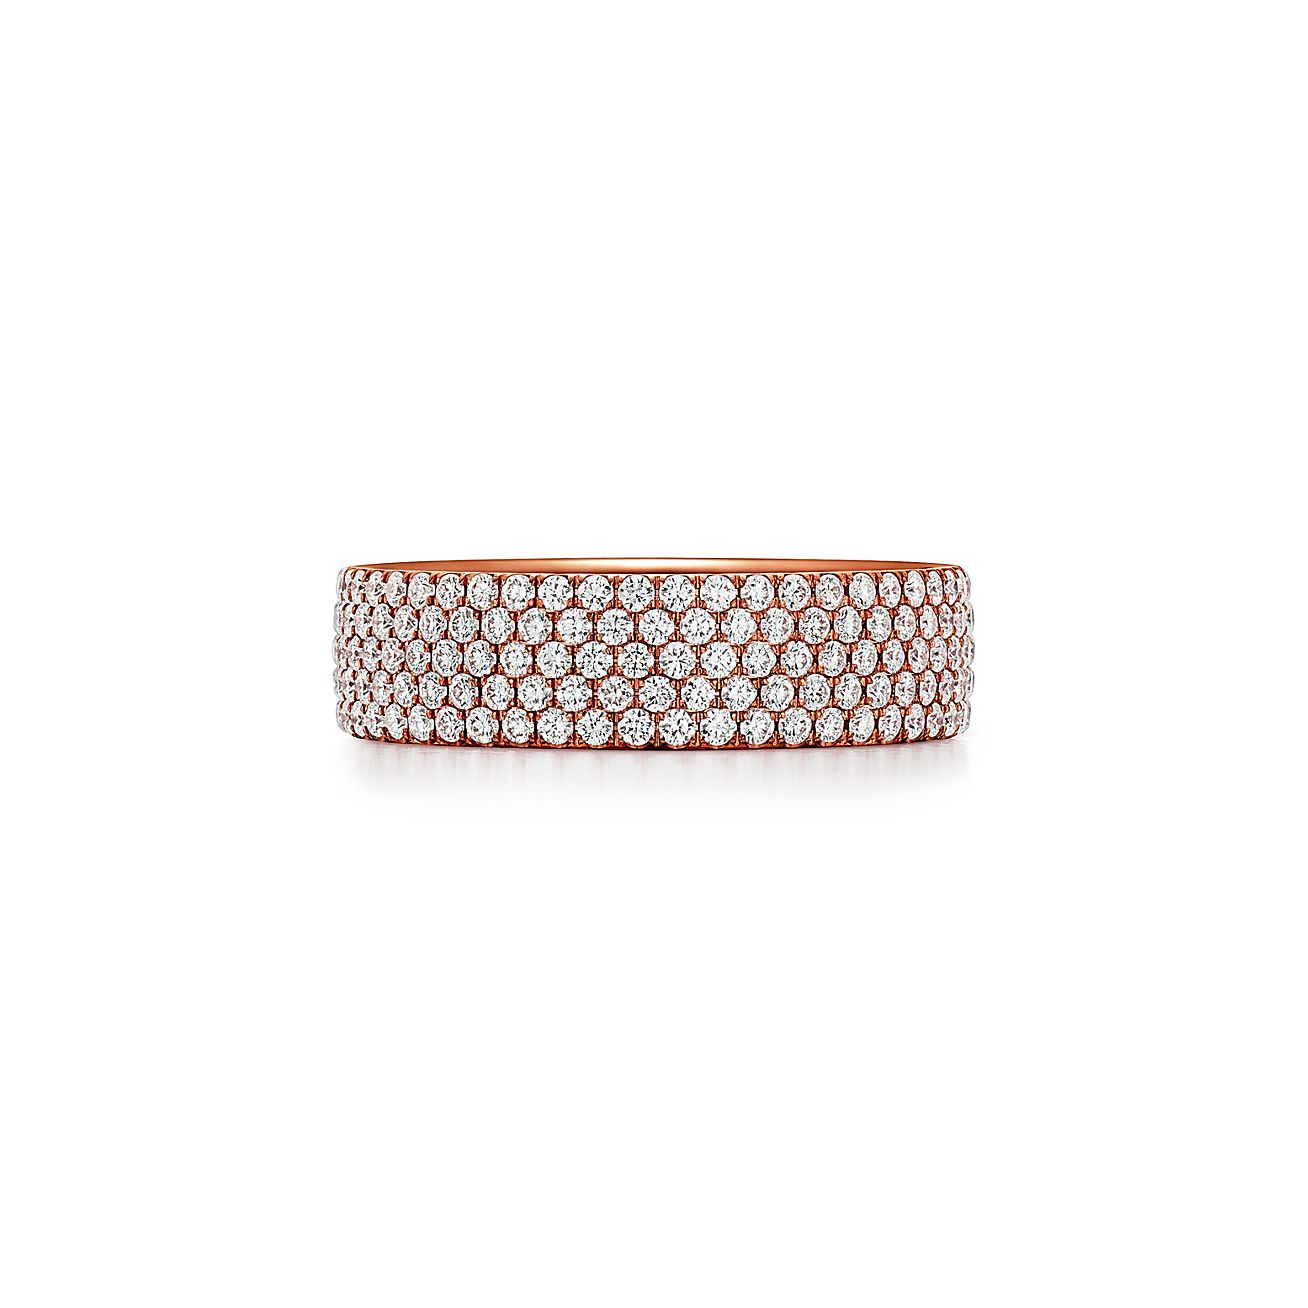 Tiffany Metro Five-row Ring in Rose Gold with Diamonds | Tiffany & Co.